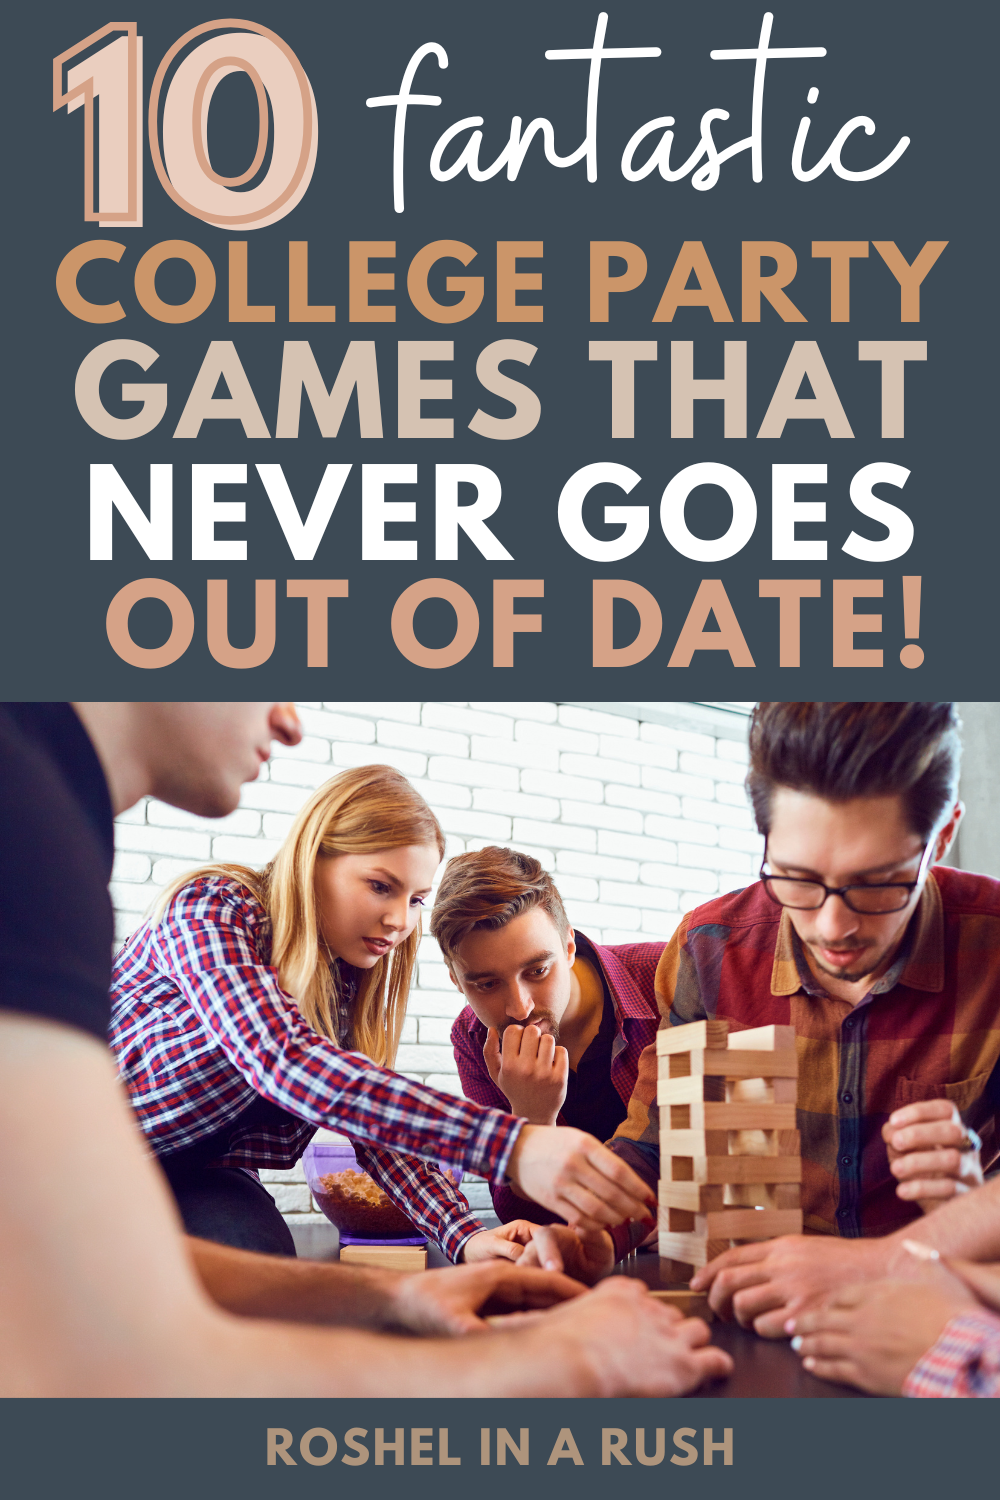 college-party-games-that-never-goes-out-of-date